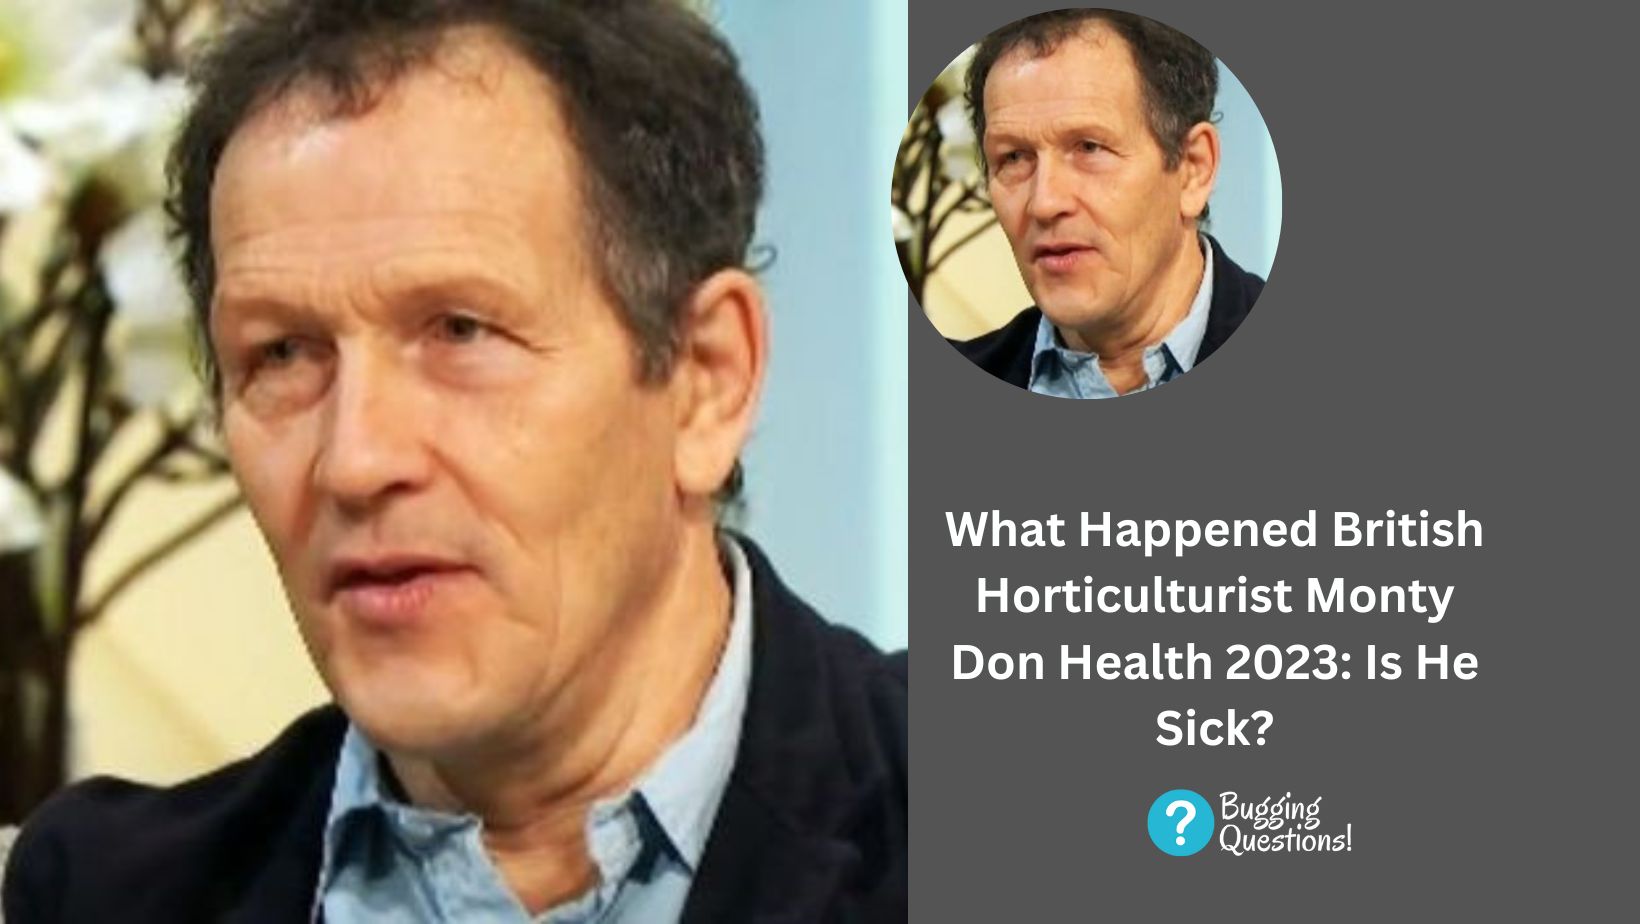 What Happened British Horticulturist Monty Don Health 2023: Is He Sick?